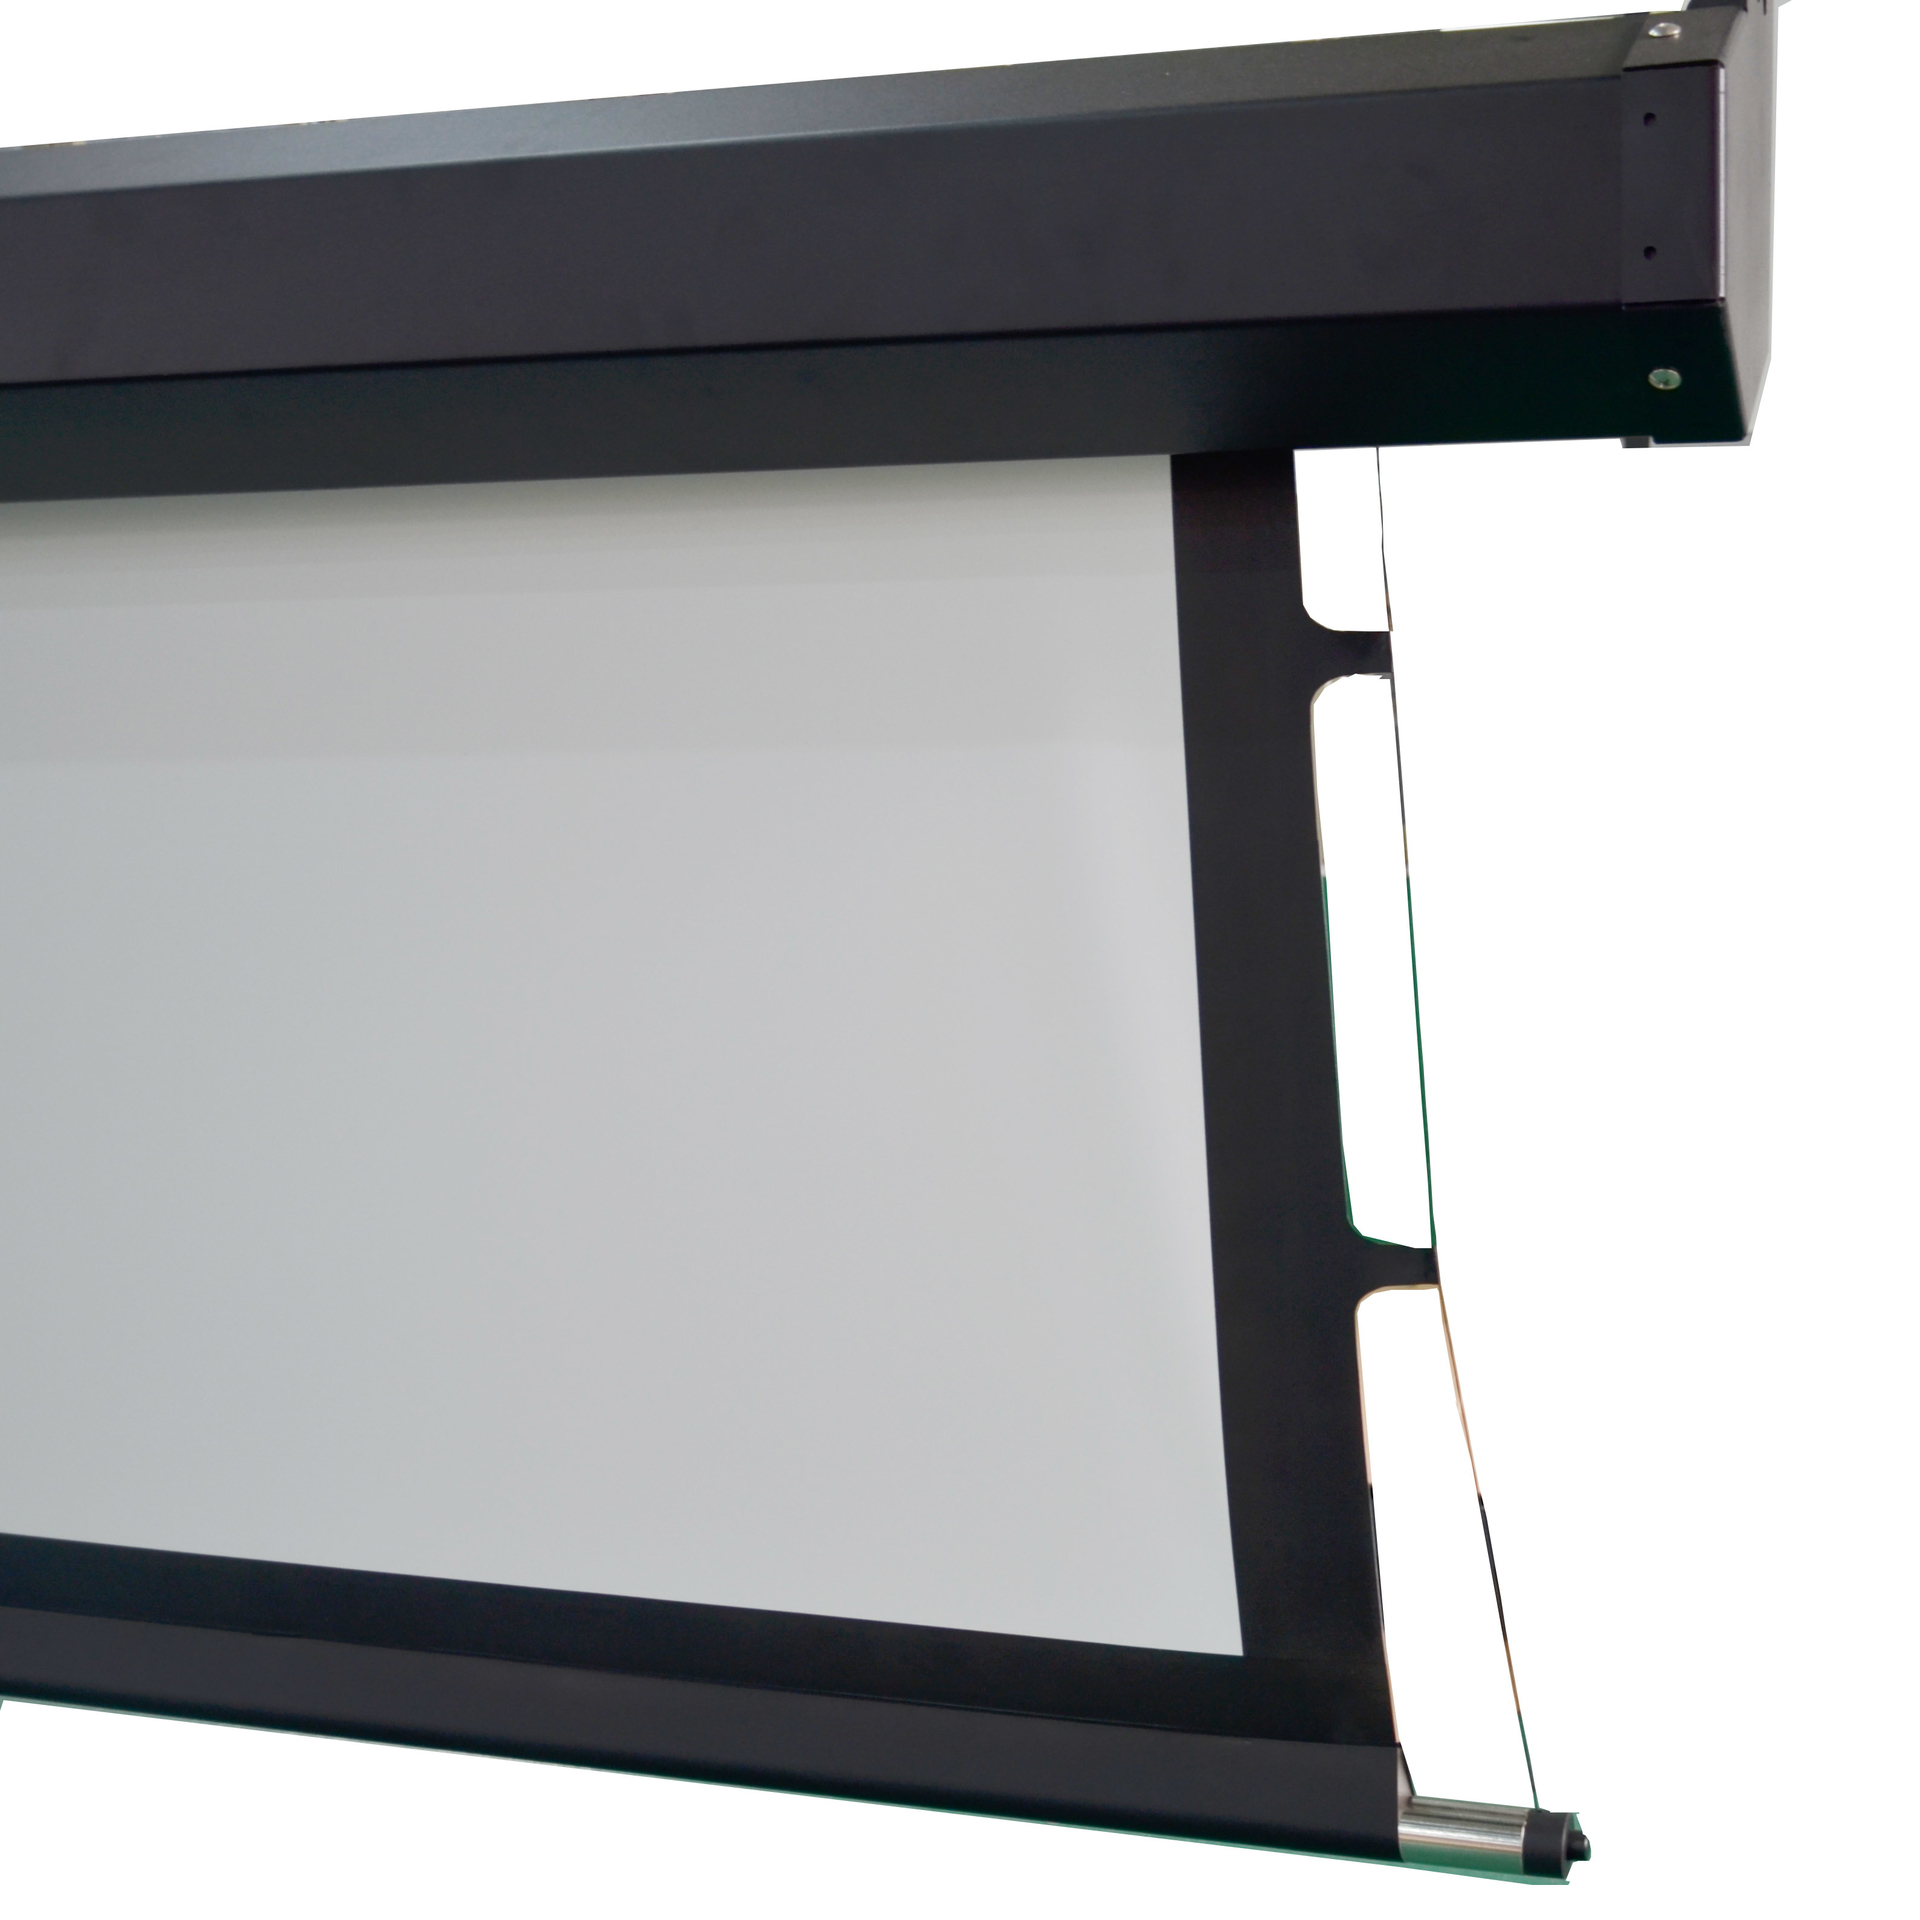 large large portable projector screen projection XY Screens